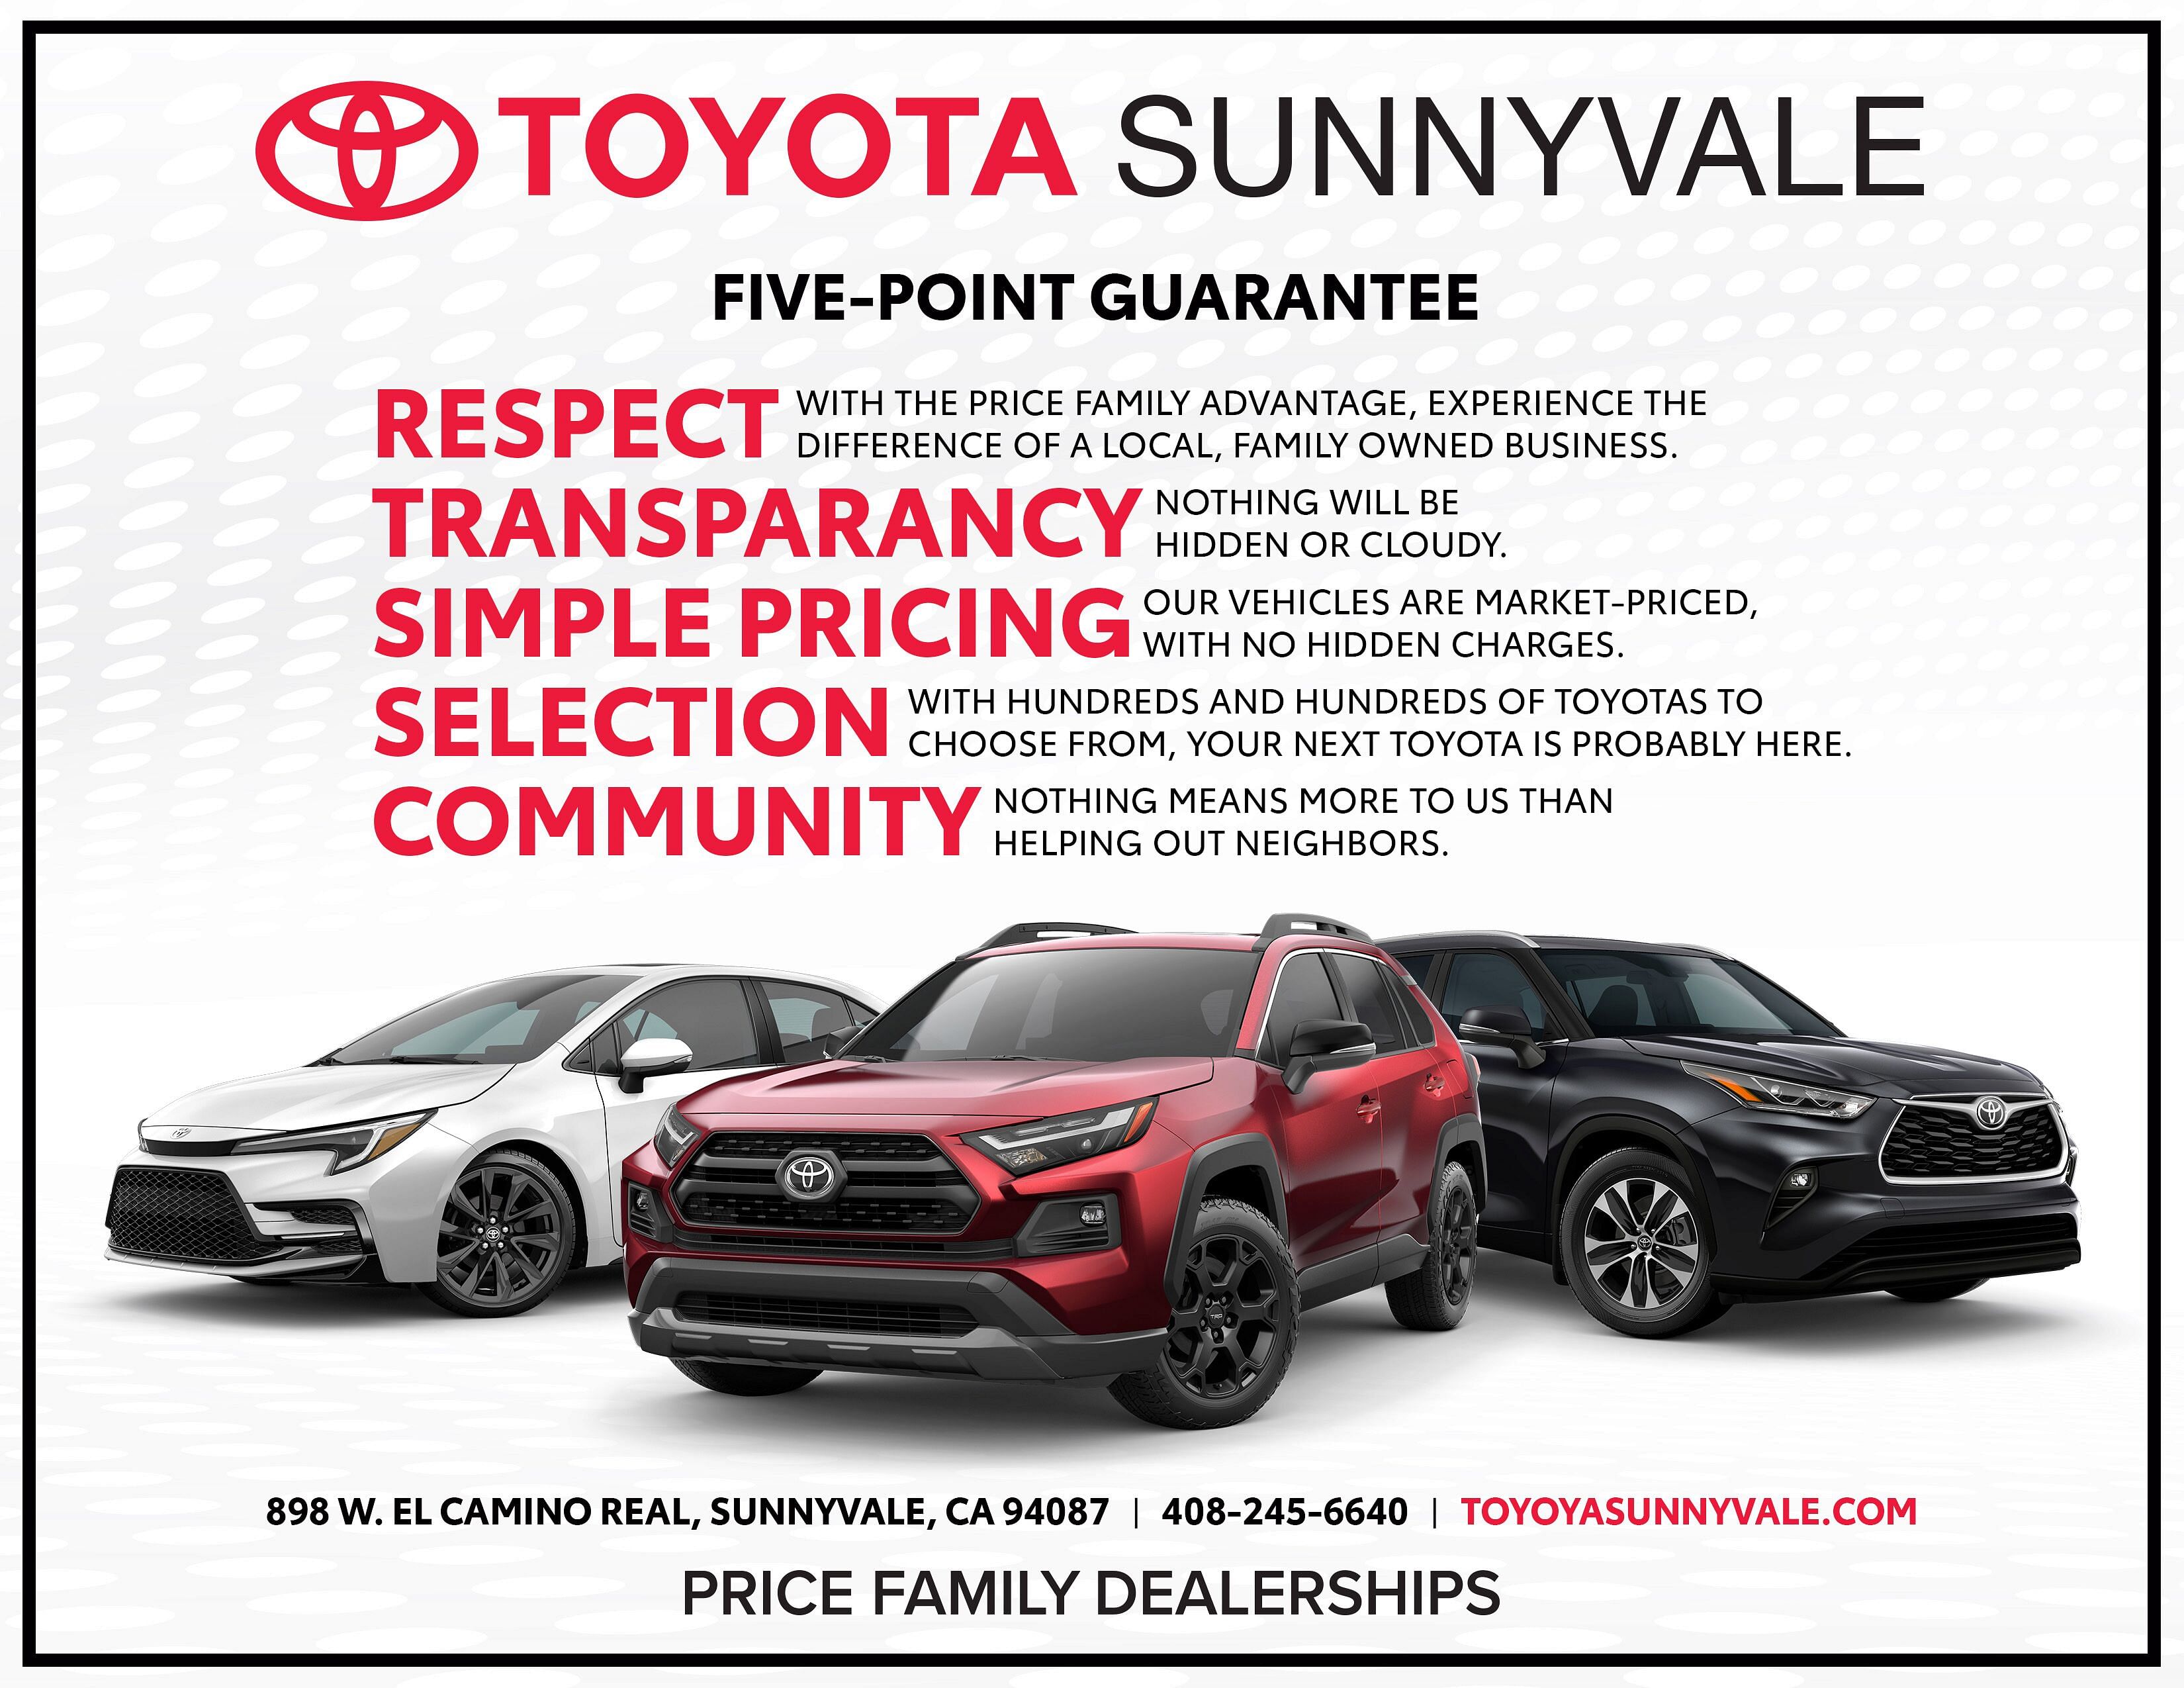 Respect, transparency, simple pricing, selection, comunity guarantee values and 3 different Toyots